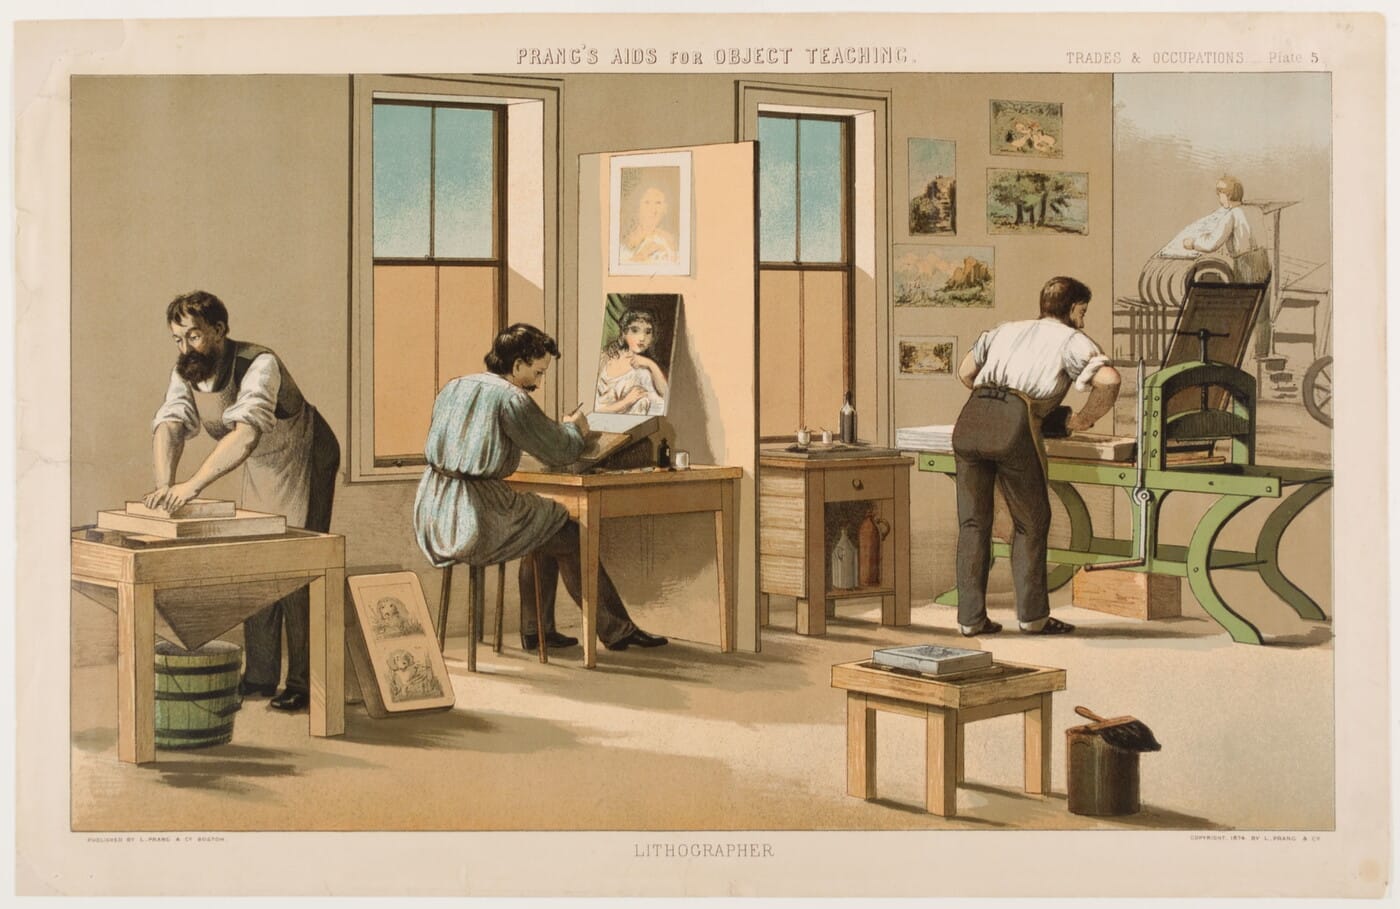 Interior of a printing studio shows the primary lithographer and his apprentices at work